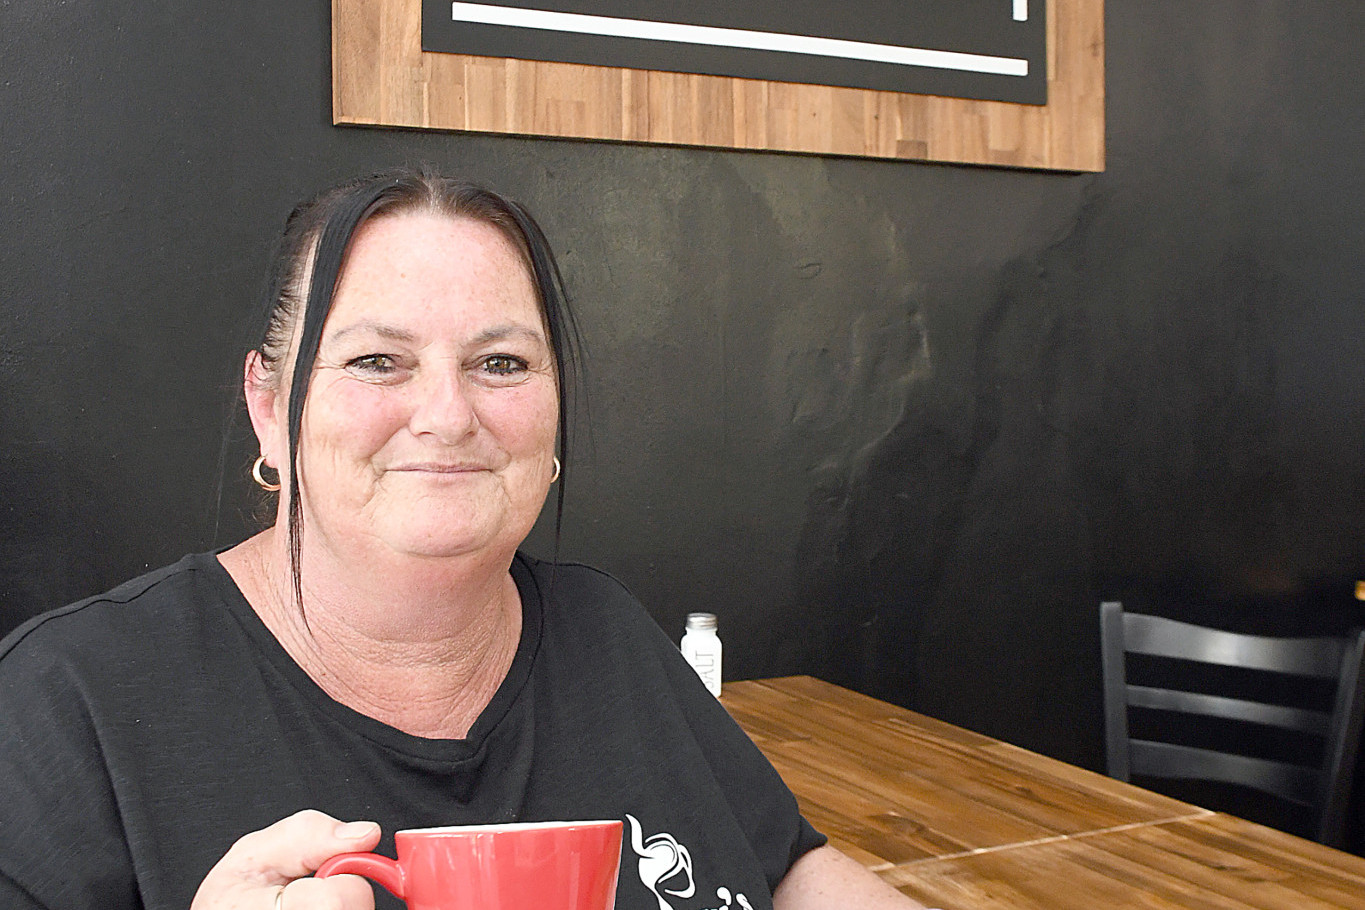 Just like her customers, Christine Little stops for a quick coffee and a rest after a busy day in her new cafe venture Chrissy’s Cafe in Murtoa this week.